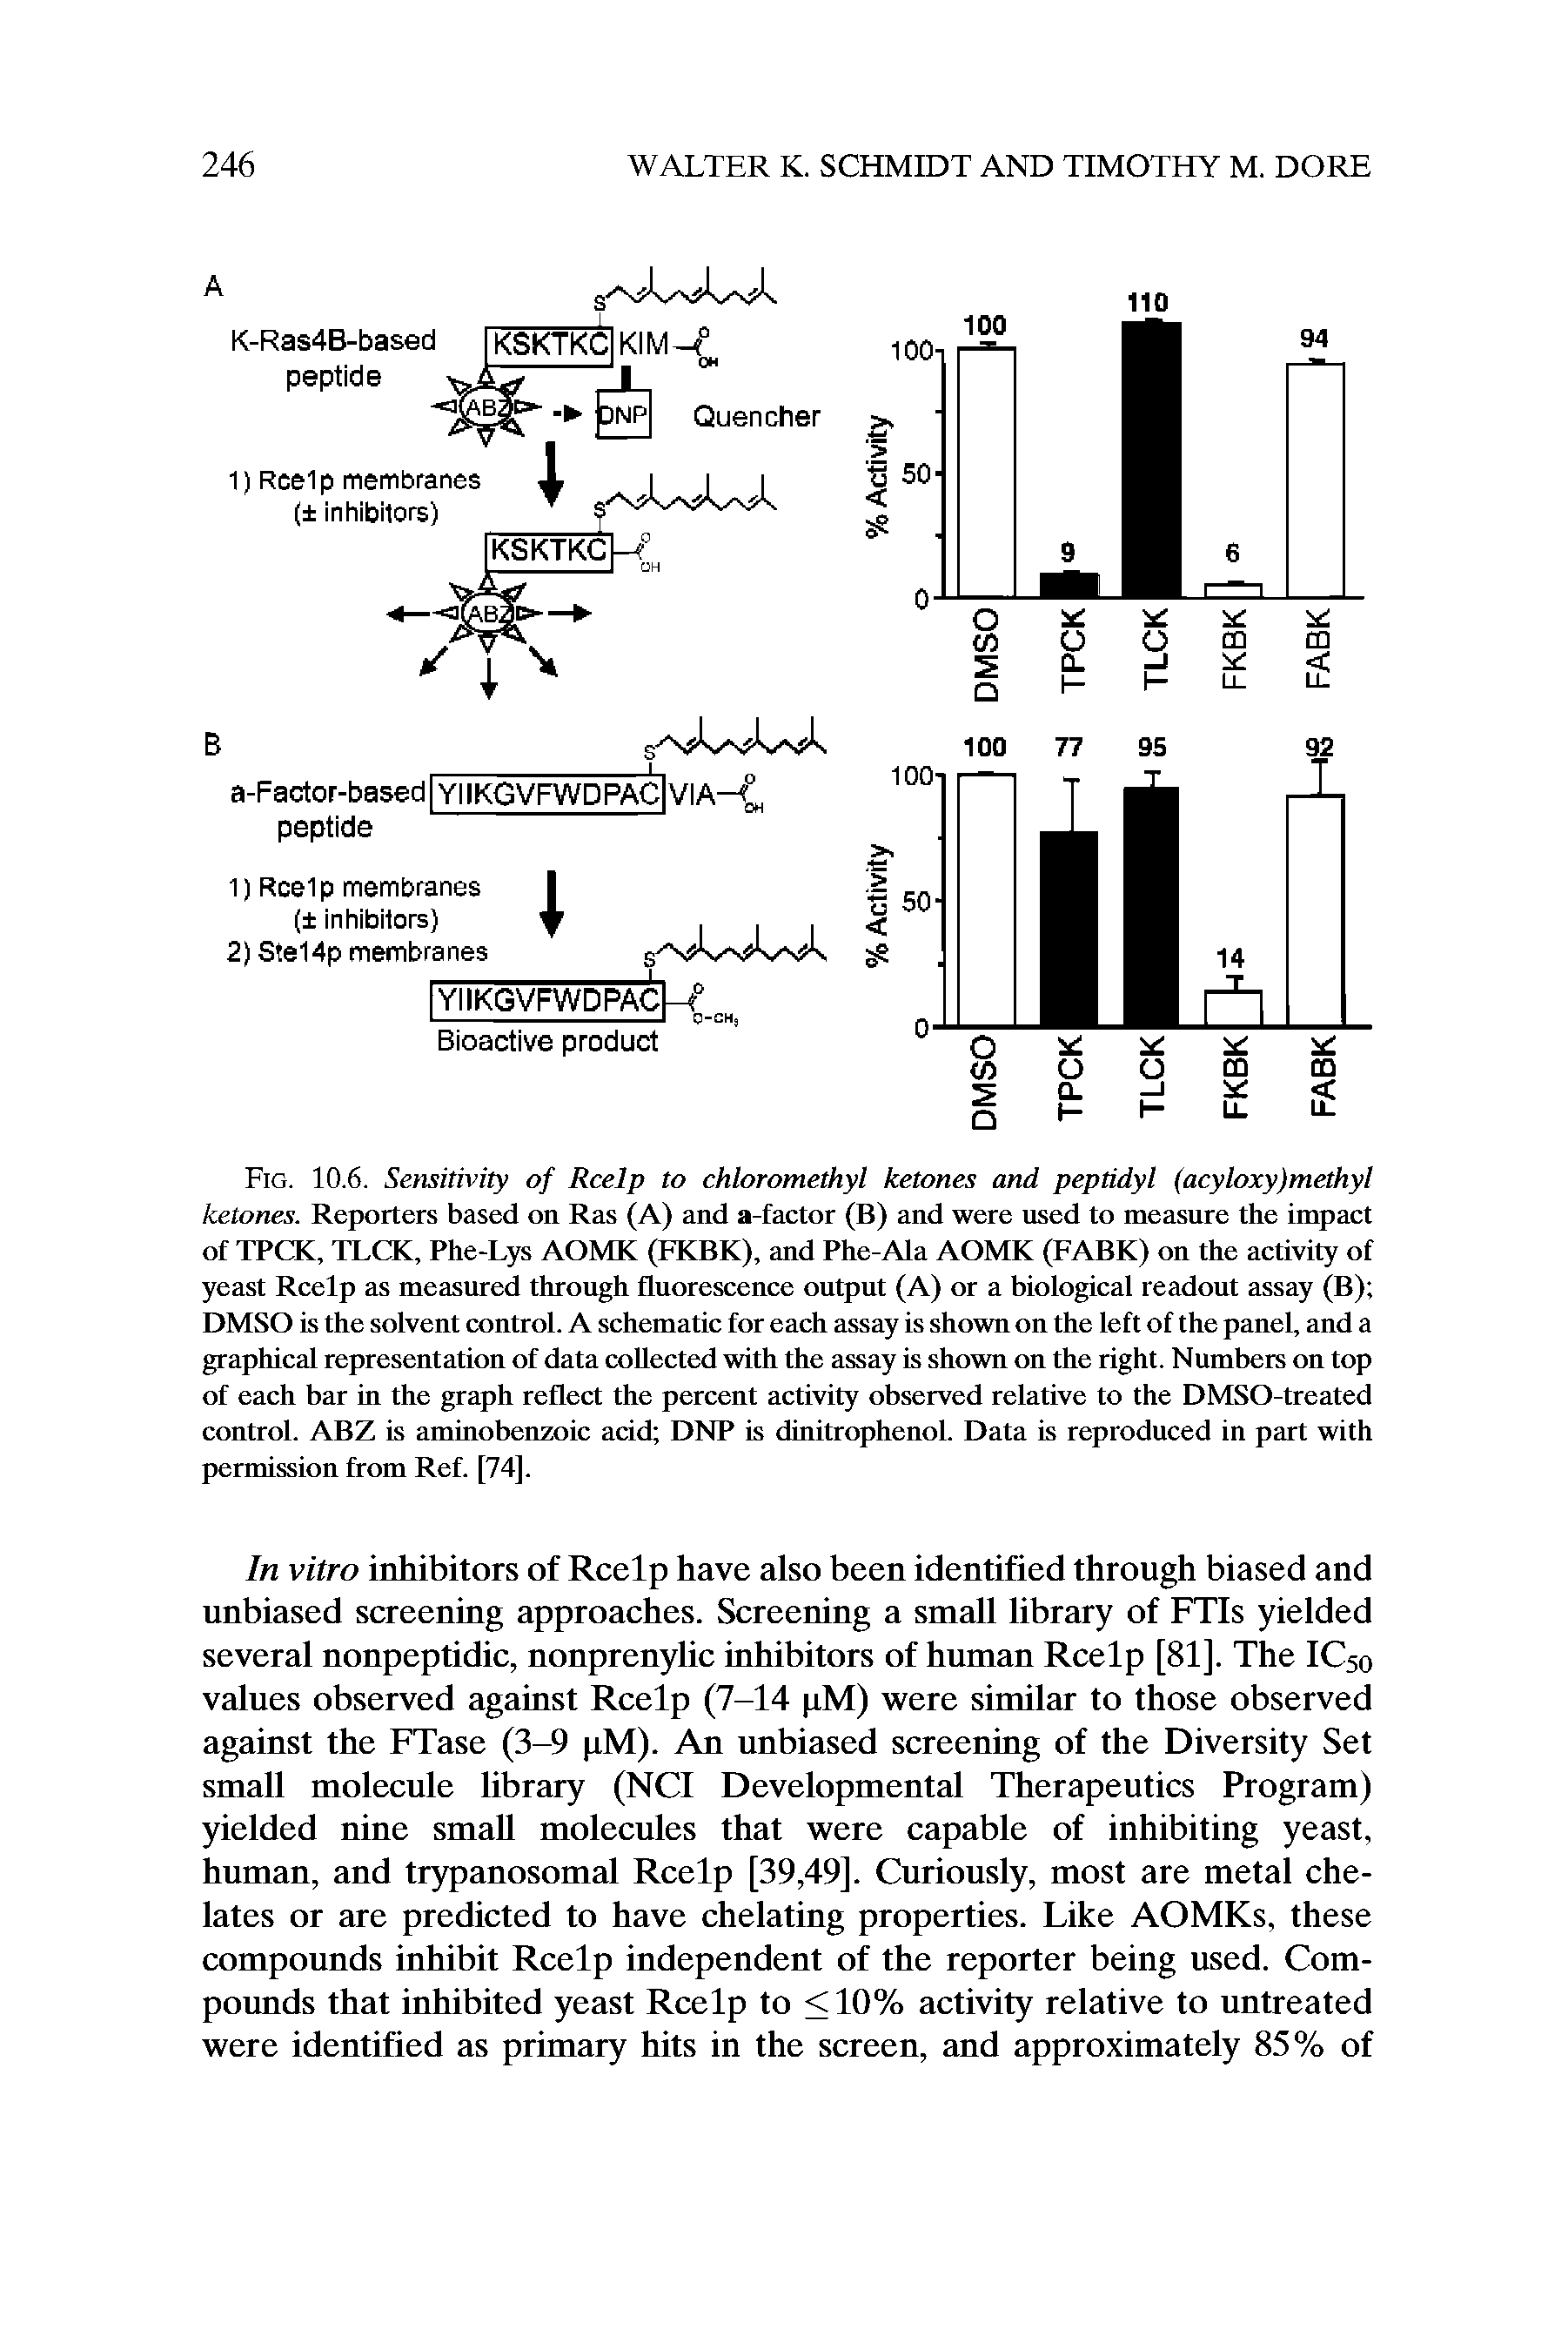 Fig. 10.6. Sensitivity of Rcelp to chloromethyl ketones and peptidyl (acyloxy)methyl ketones. Reporters based orr Ras (A) arrd a-factor (B) arrd were used to measure the impact of TPCK, TLCK, Phe-Lys AOMK (FKBK), and Phe-Ala AOMK (FABK) on the activity of yeast Rcelp as measured through fluorescence output (A) or a biological readout assay (B) DMSO is the solvent control. A schematic for each assay is shown on the left of the panel, and a graphical representation of data collected with the assay is shown on the right. Numbers on top of each bar in the graph reflect the percent activity observed relative to the DMSO-treated control. ABZ is aminobenzoic acid DNP is dinitrophenol. Data is reproduced in part with permission from Ref. [74].